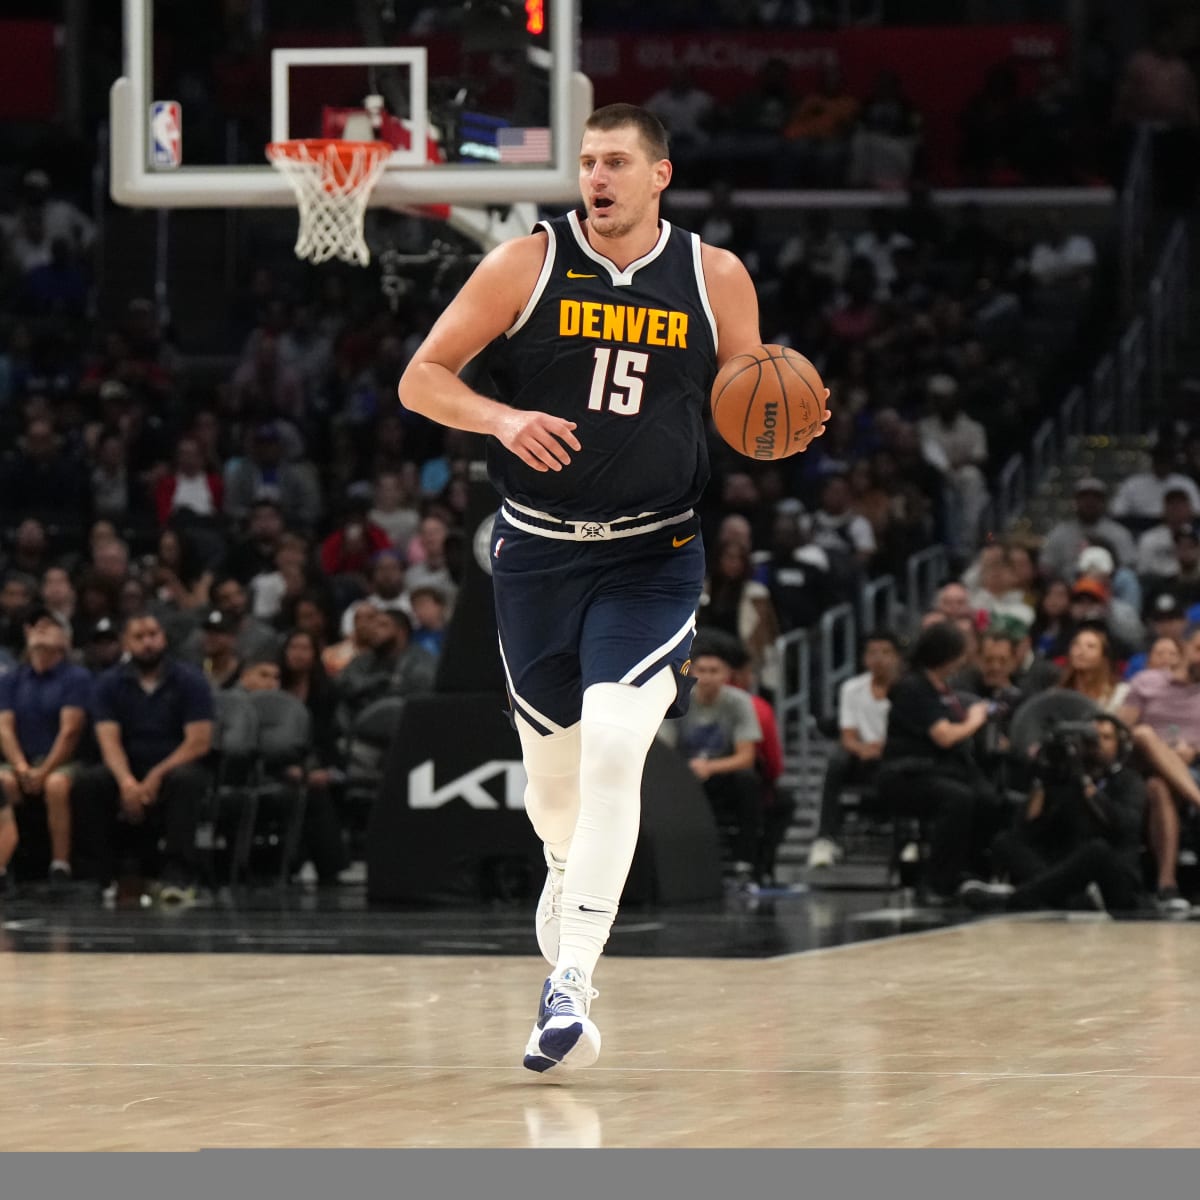 Denver Nuggets vs Los Angeles Lakers: Analysis and Prediction – Oct. 25,  2023 - Basketball Sphere